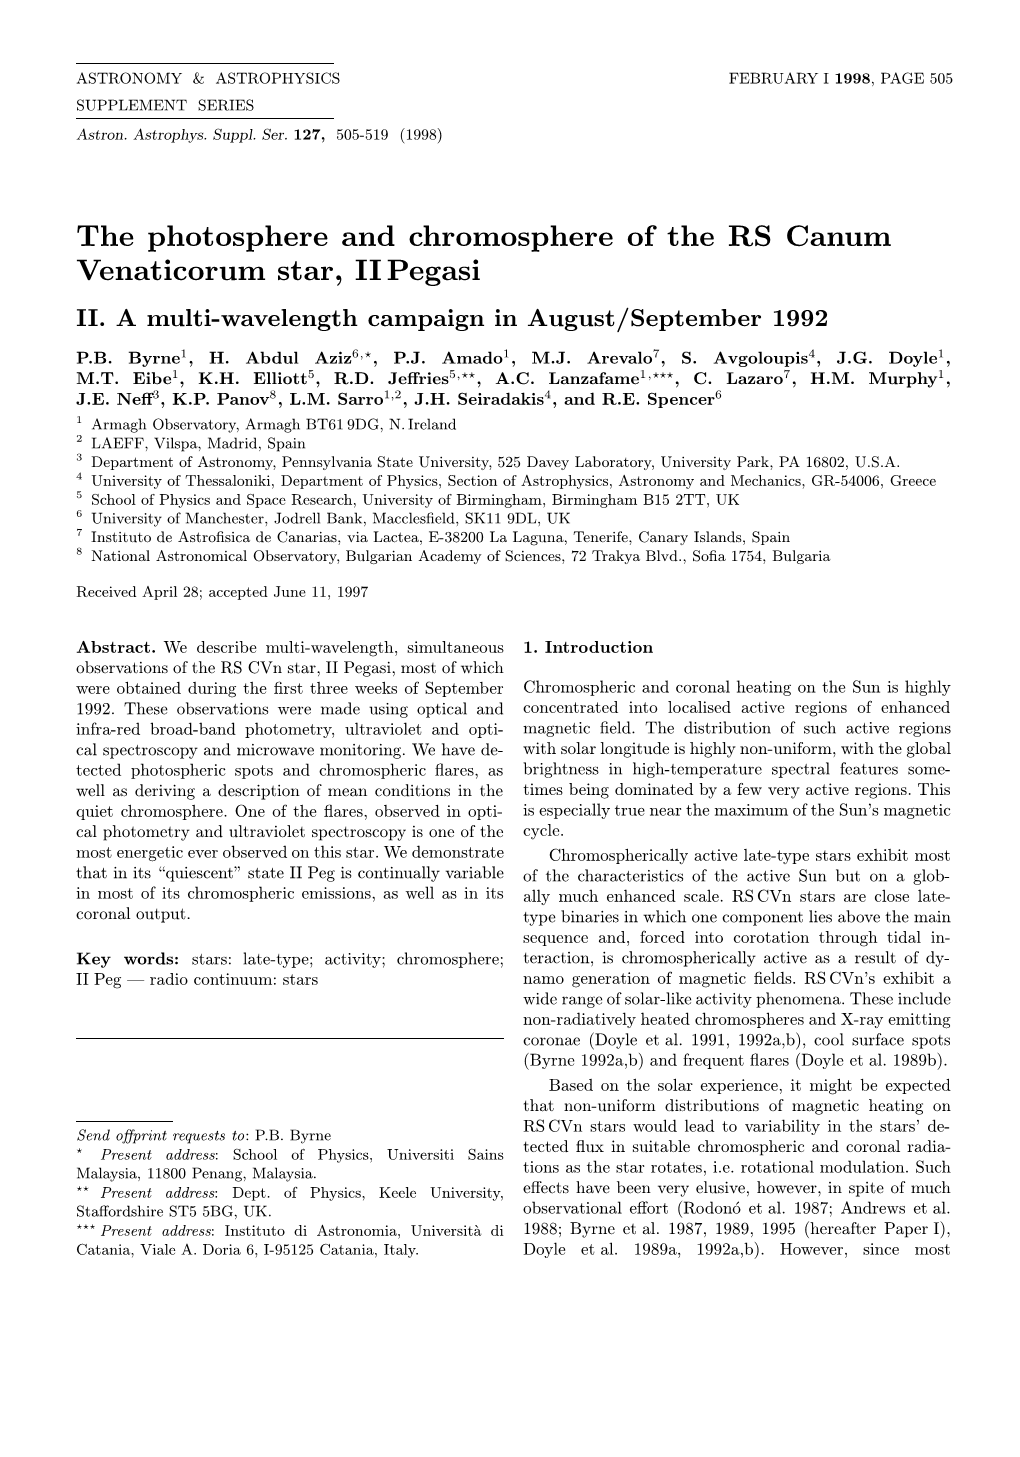 The Photosphere and Chromosphere of the RS Canum Venaticorum Star, II Pegasi II